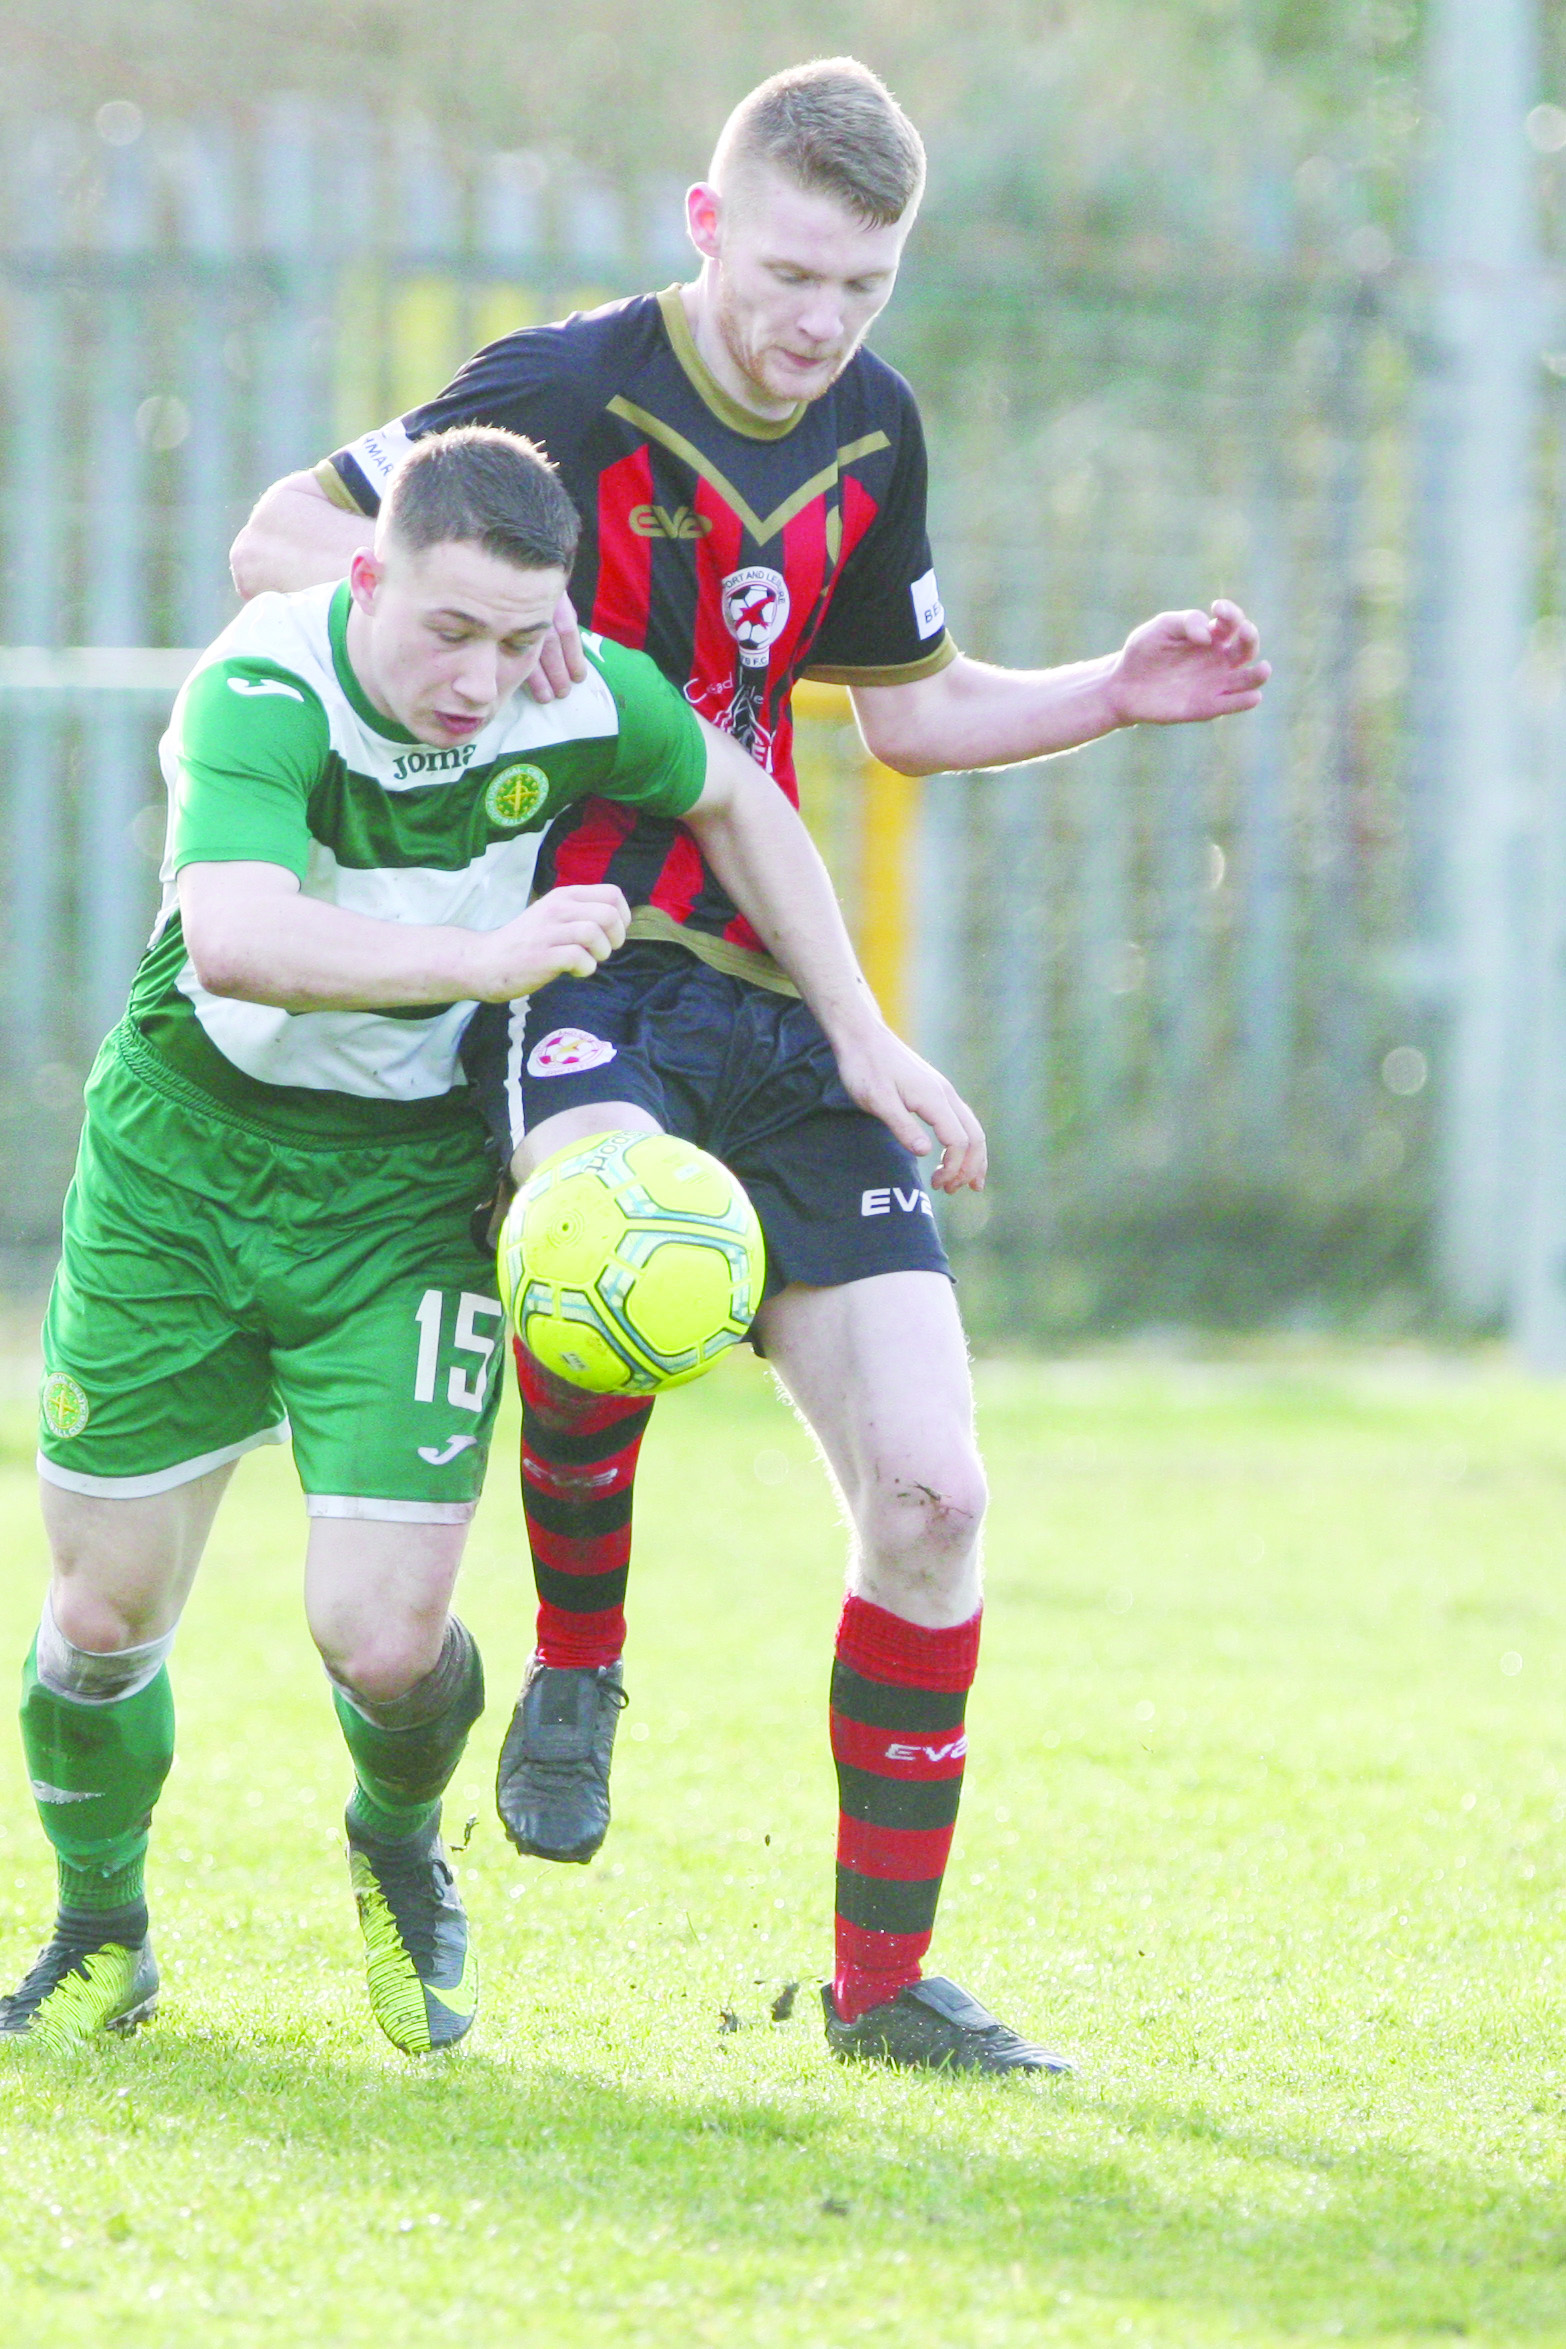 Donegal Celtic’s Paul Ryan in action against Sport and Leisure Swifts. DC will be hoping to return to form when they host Linfield Swifts in the Intermediate Cup on Saturday 